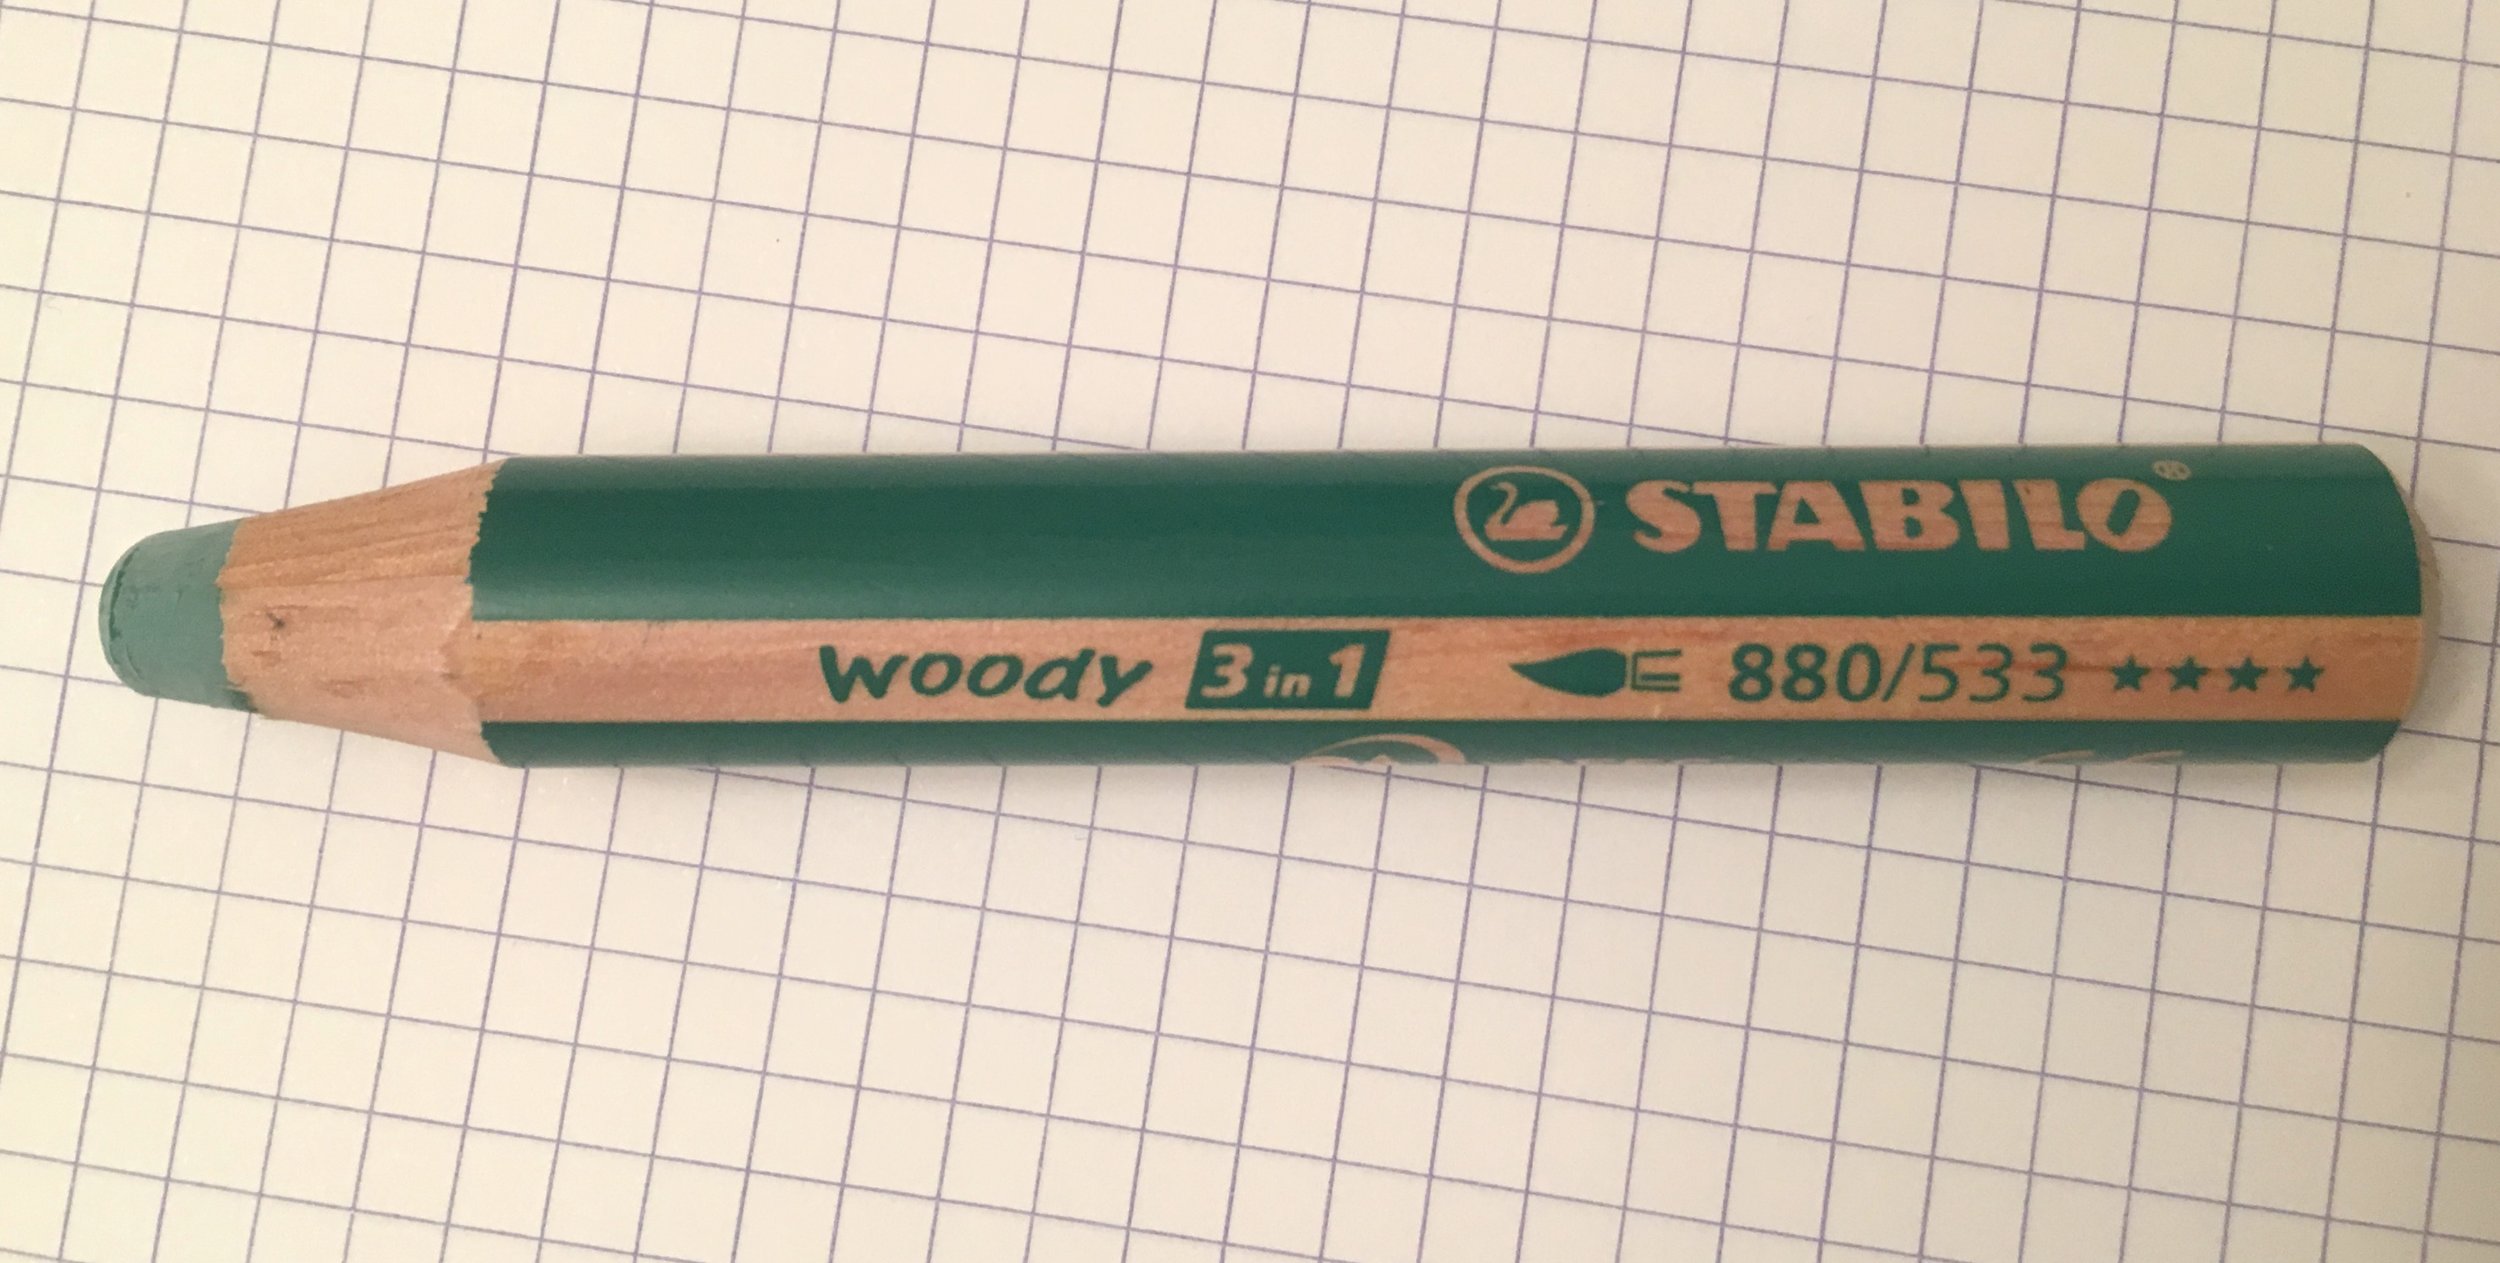 Stabilo Woody 3-in-1 Watercolor Pencils Review — The Pen Addict